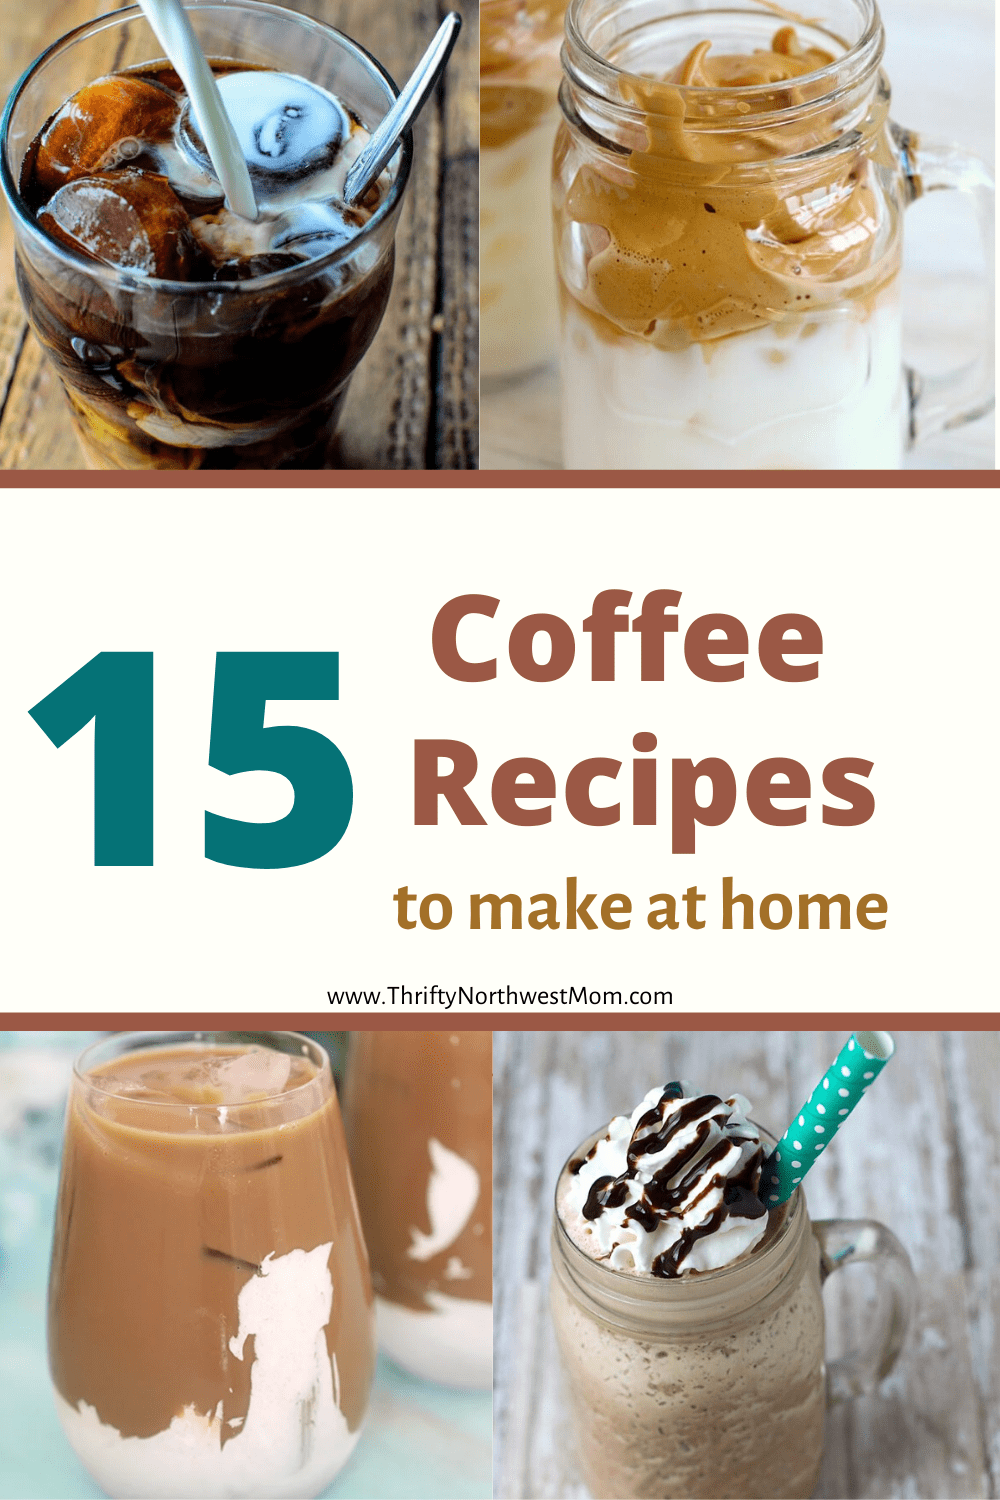 15 Coffee Recipes to make at Home